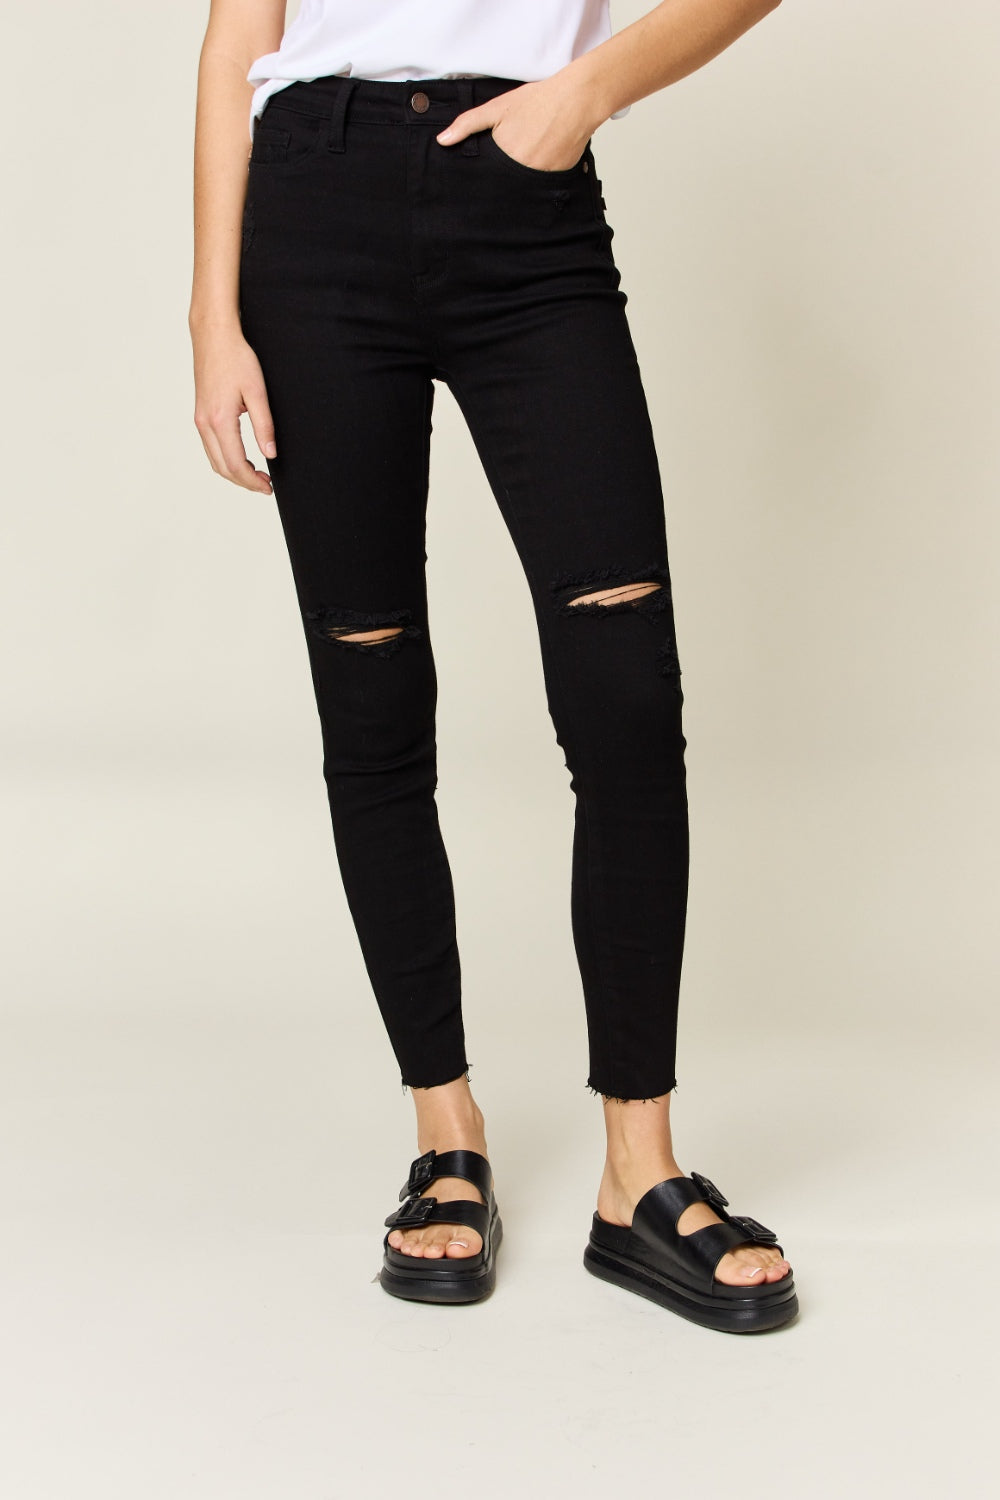 Judy Blue Skinny Jeans - Black - Distressed - Inspired Eye Boutique